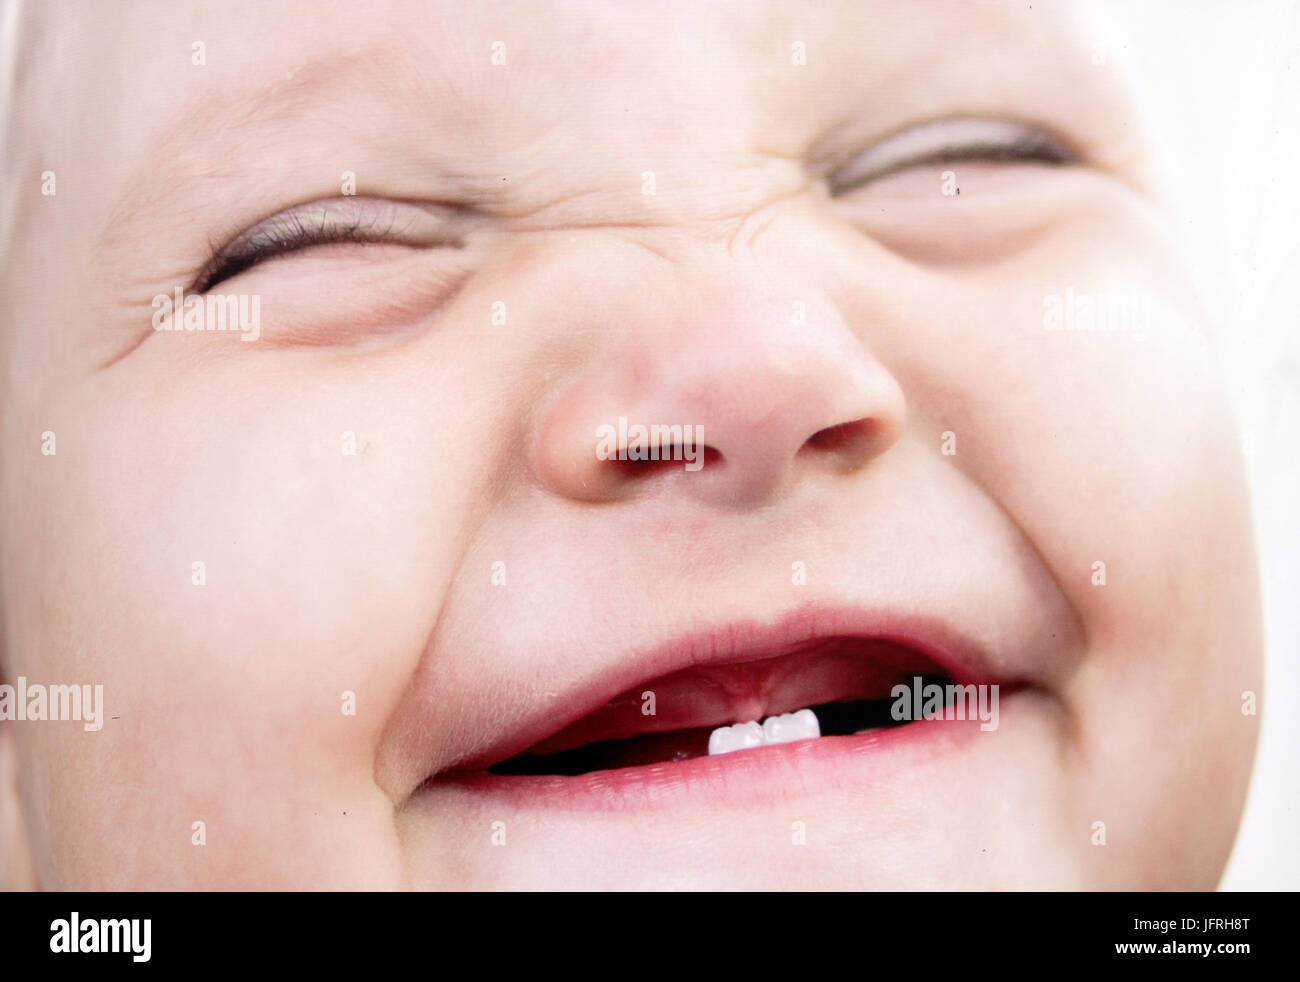 baby face poster Stock Photo